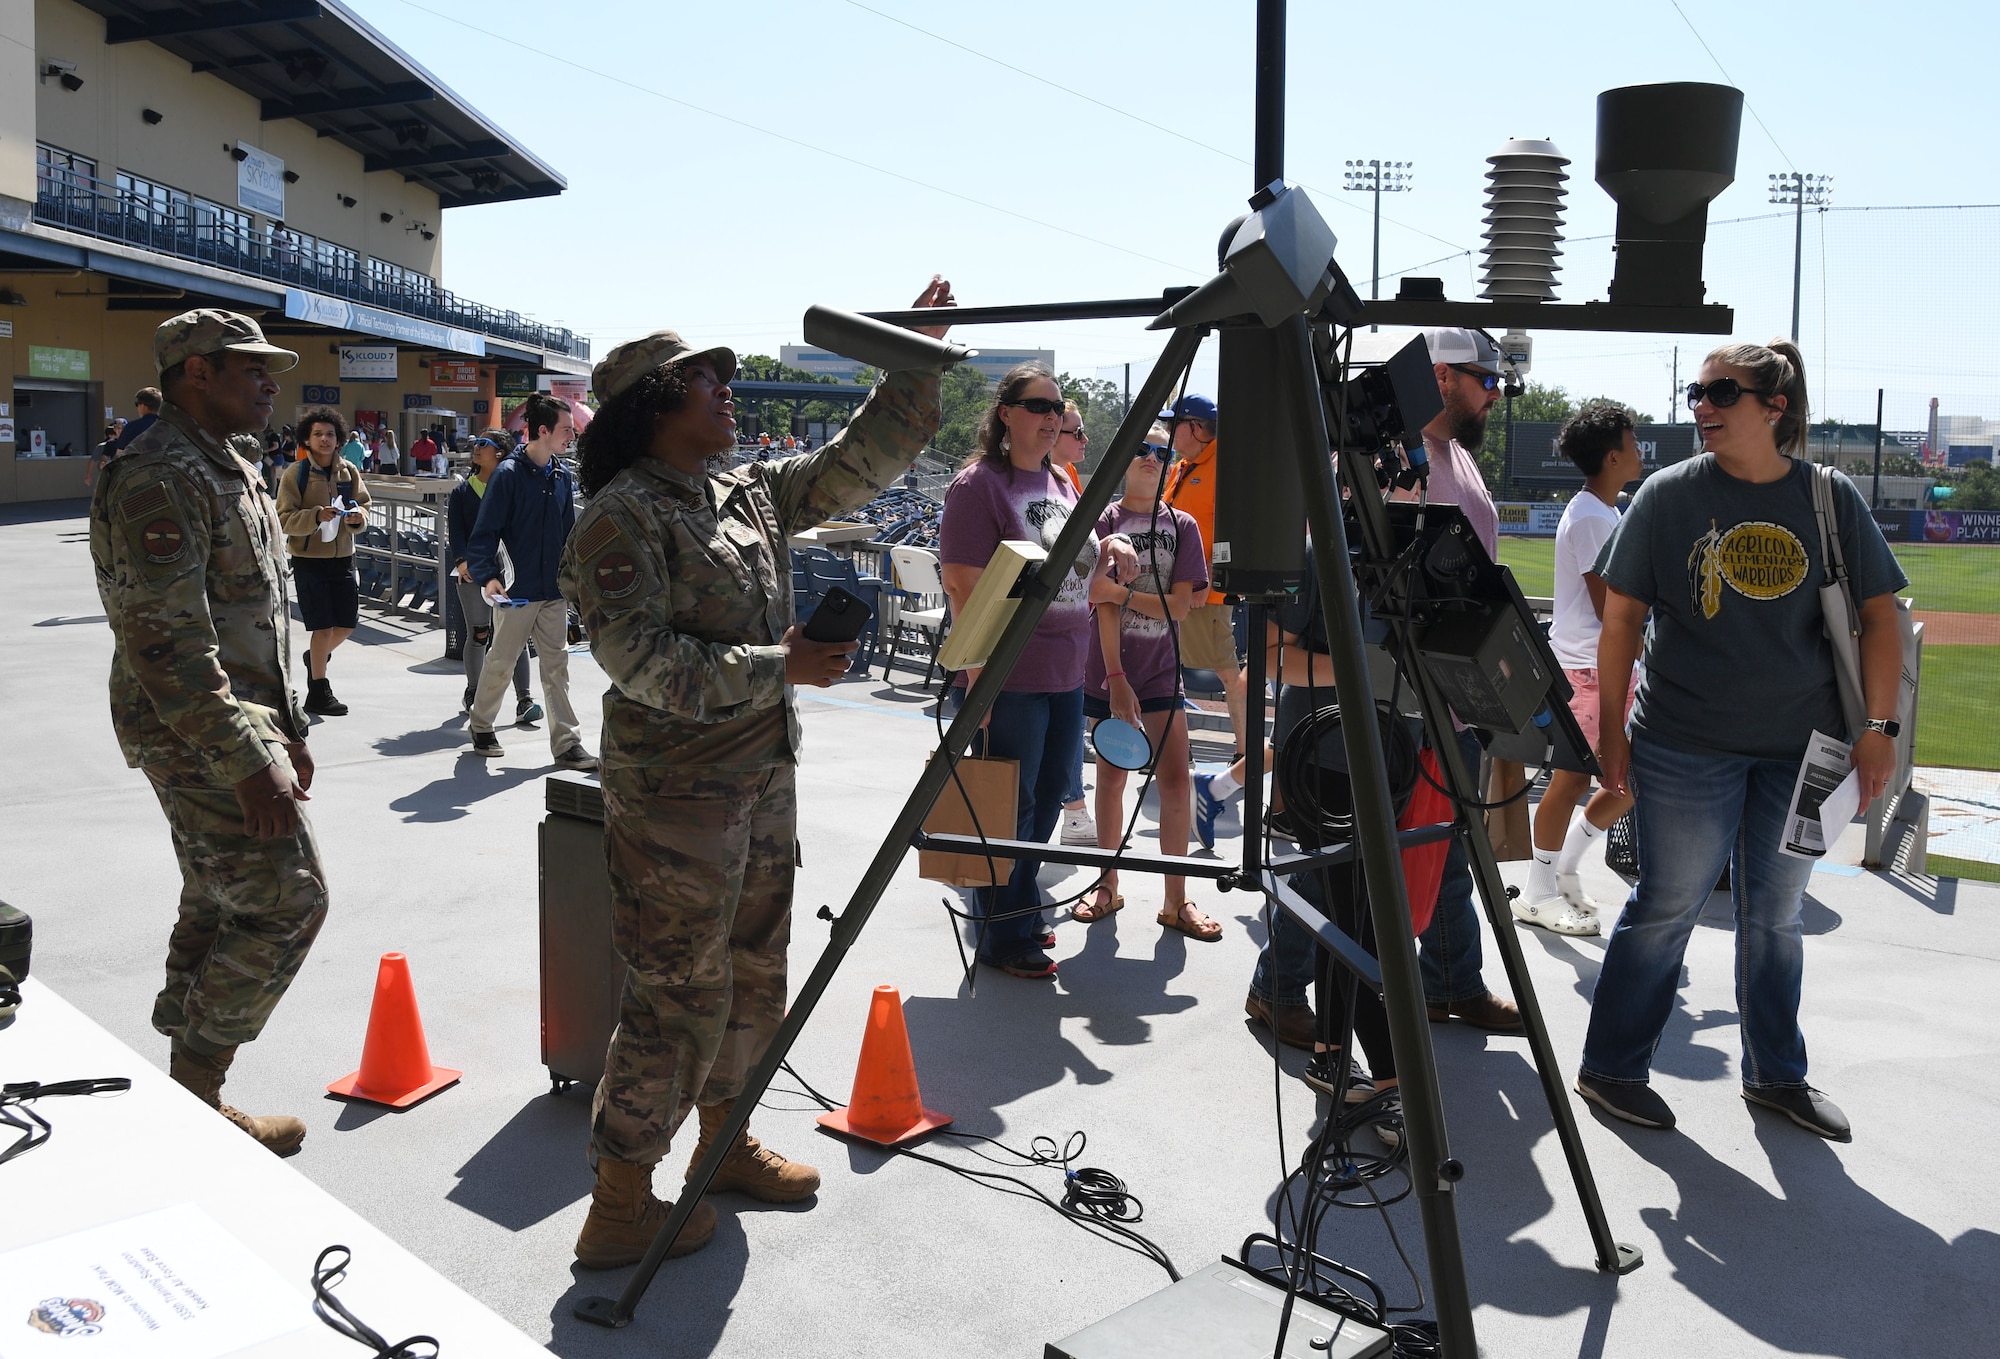 U.S. Air Force Tech. Sgt. Jarrett Parker and Staff Sgt. Greggria Sylvester, 335th Training Squadron instructors, provide a briefing on a tactical meteorological observational system to parents, students and teachers from Agricola Elementary School during the Biloxi Shuckers Education Day event in Biloxi, Mississippi, May 11, 2022. The event allowed Airmen from the 81st Training Group to set up training equipment displays for local school-aged children to view during the Biloxi Shuckers' game. (U.S. Air Force photo by Kemberly Groue)